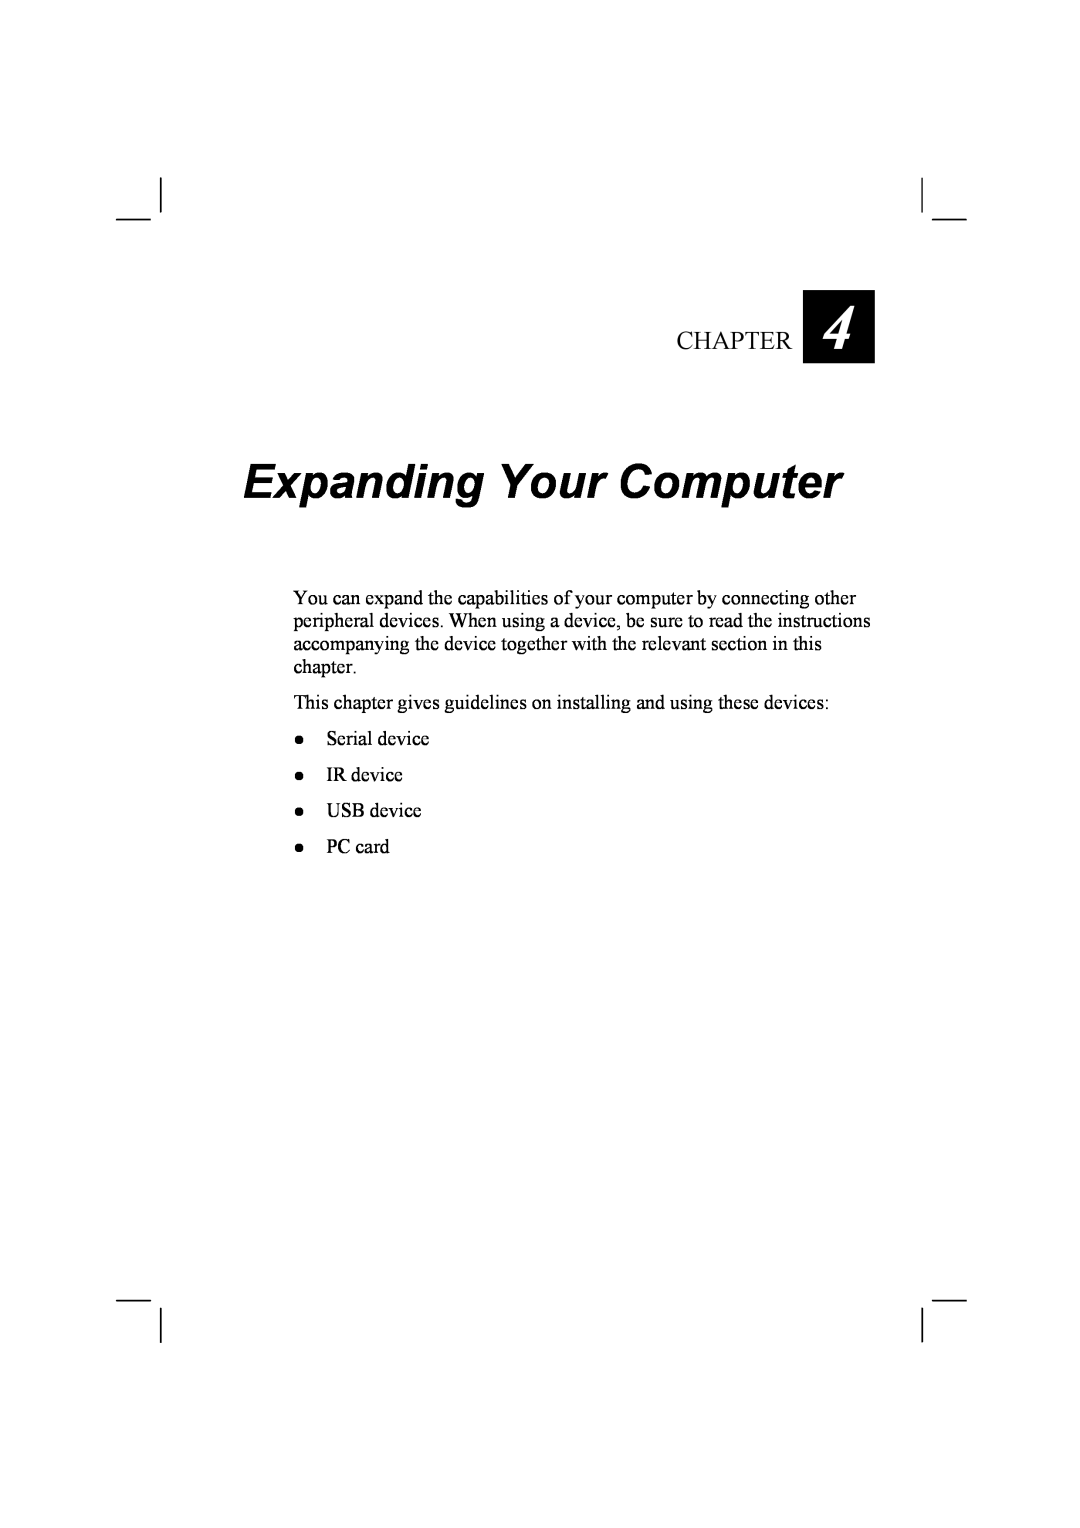 TAG 20 Series manual Expanding Your Computer, Chapter, This chapter gives guidelines on installing and using these devices 